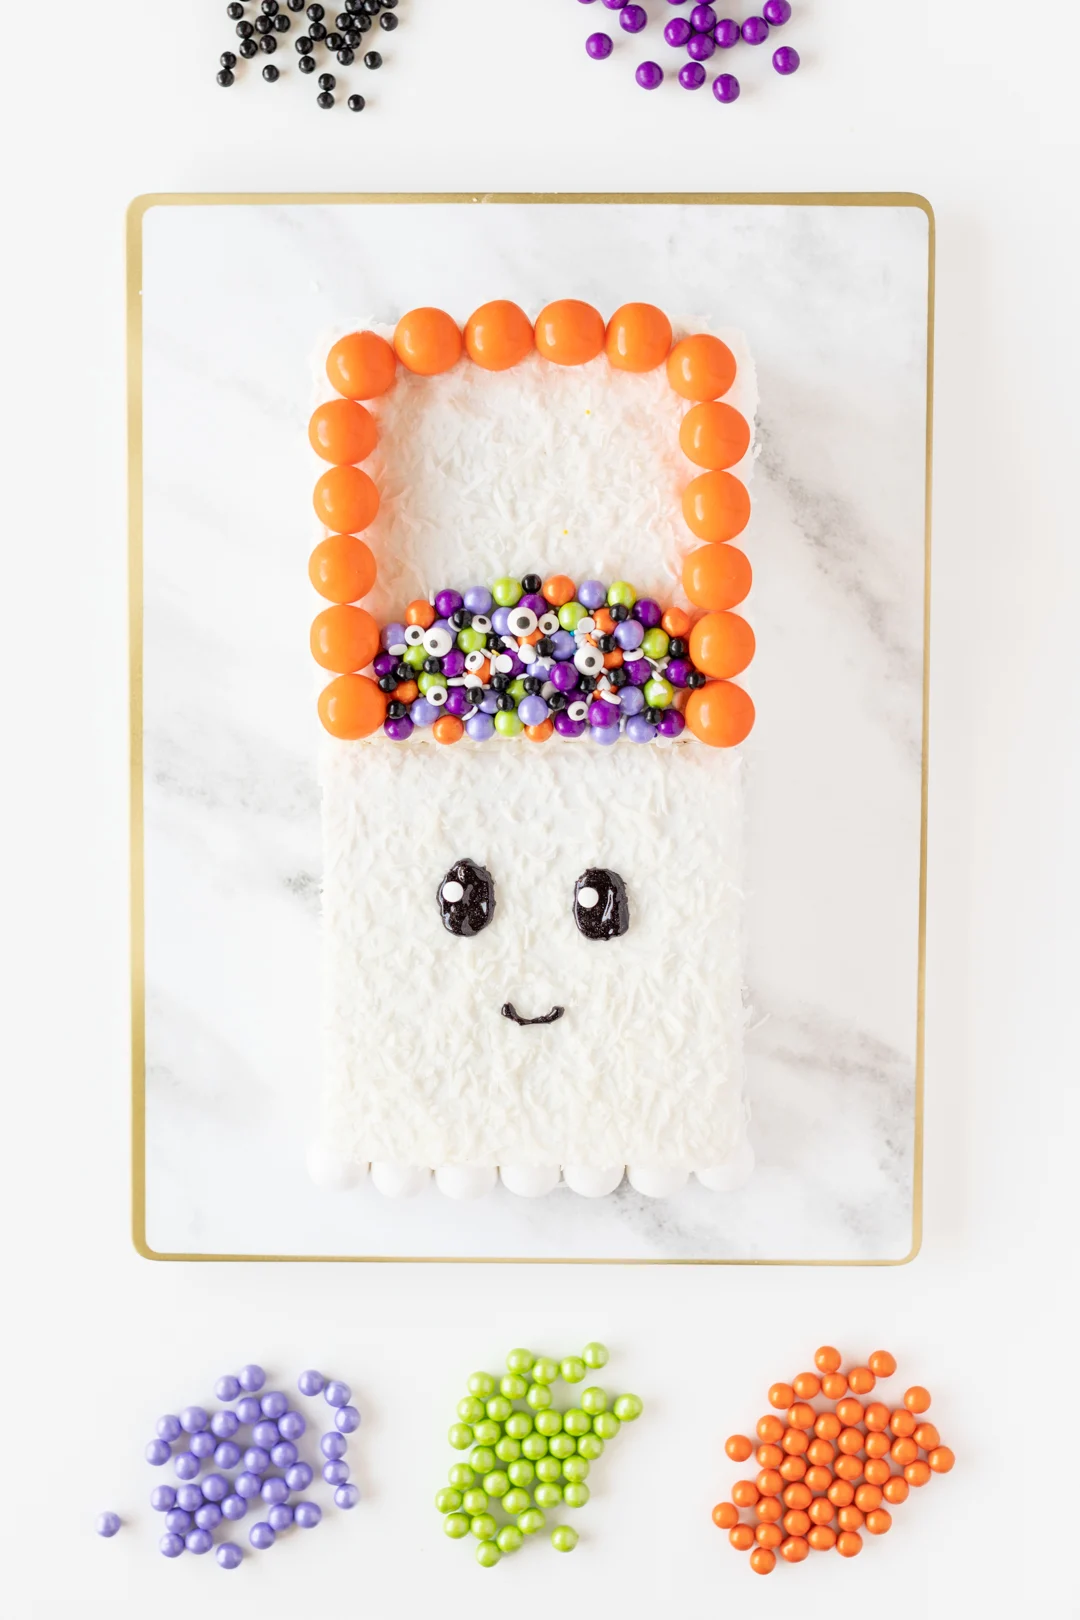 Cute ghost cake for trick or treat.